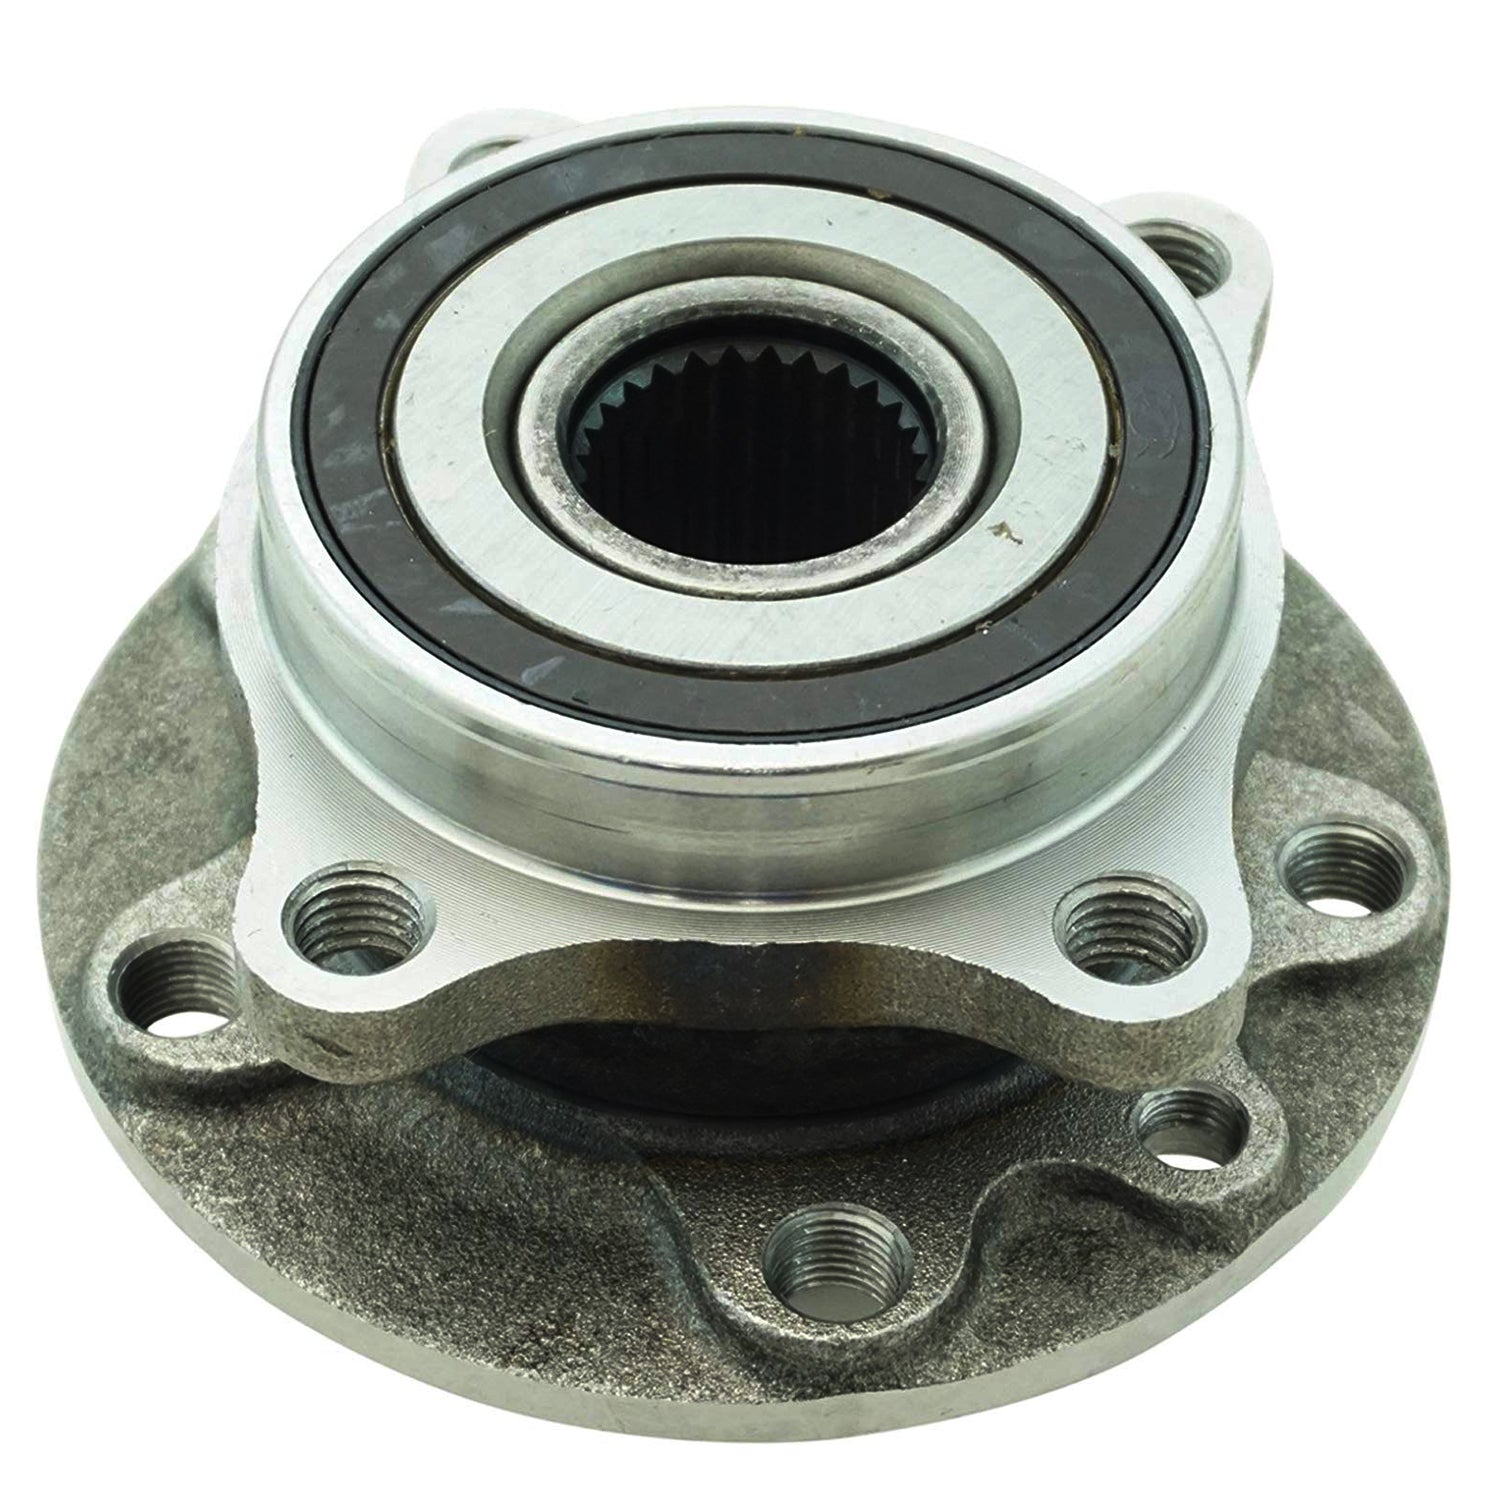 MotorbyMotor 512510 Rear Wheel Bearing and Hub Assembly fits for Dodge Dart (Fit Only Engine:1.4L/2.0L/2.4L) Low-Runout OE Directly Replacement Hub Bearing MotorbyMotor